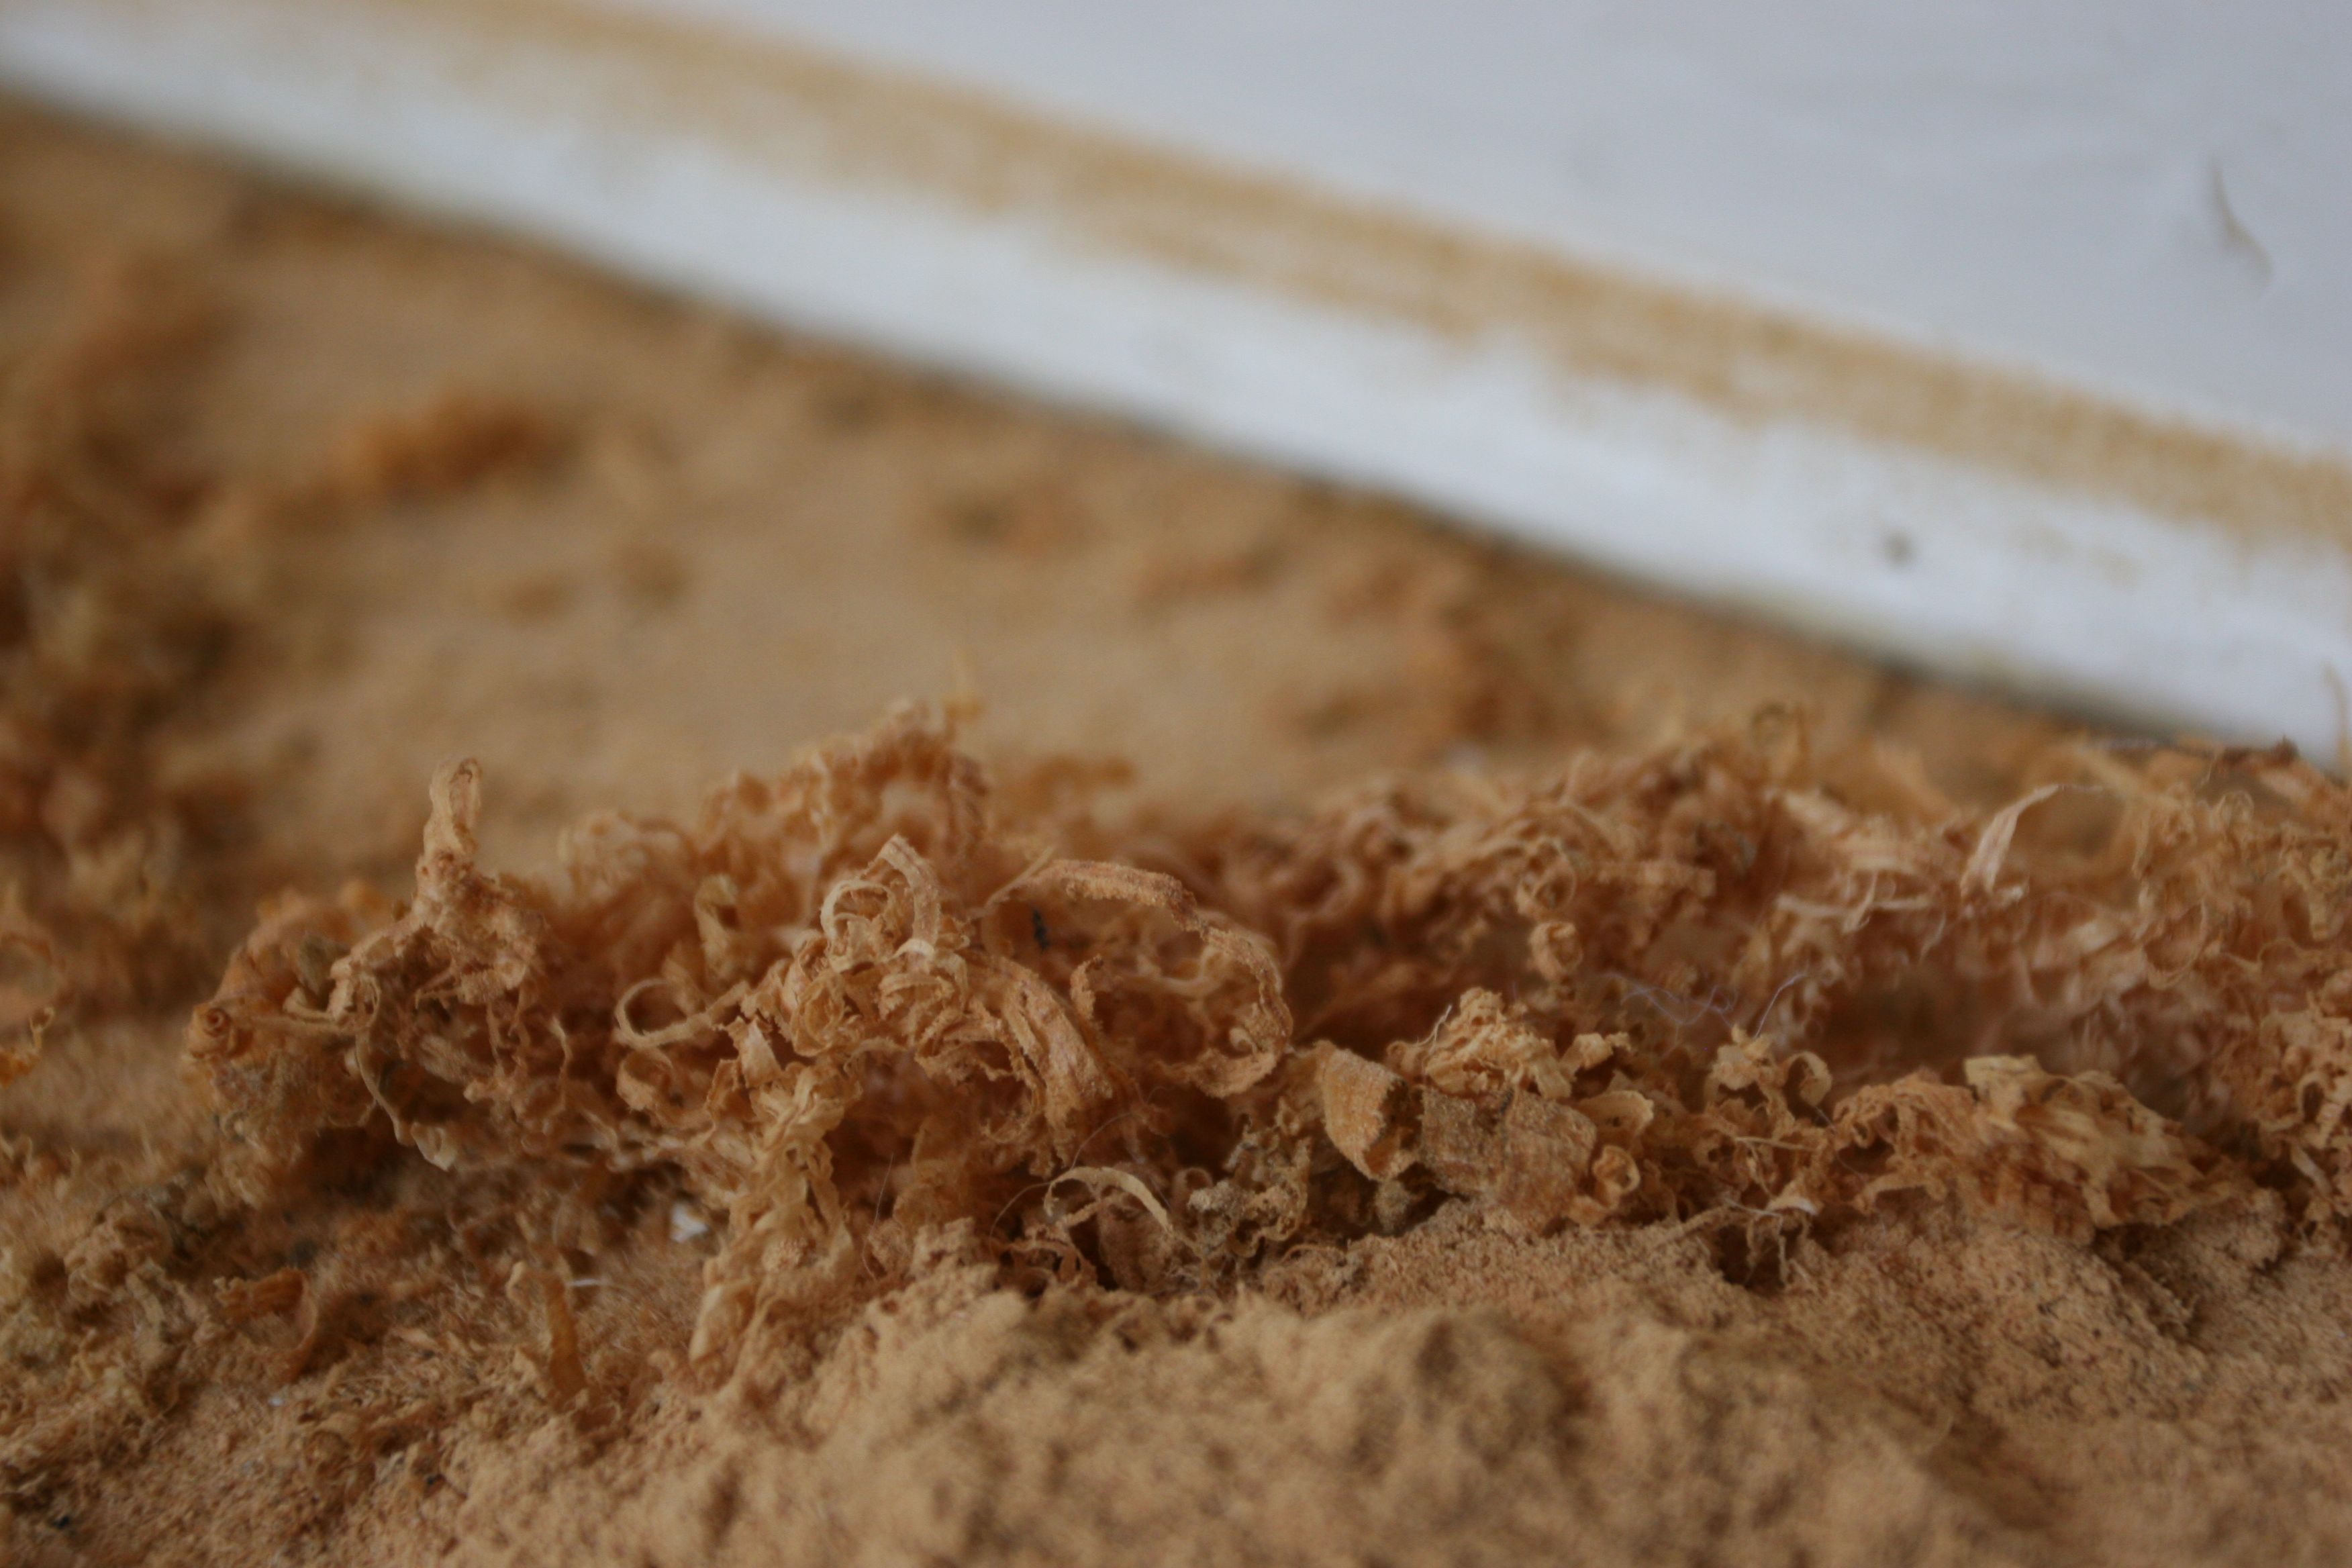 Some shavings from where Frank (and later Eric) was hand scraping the staircase bits.